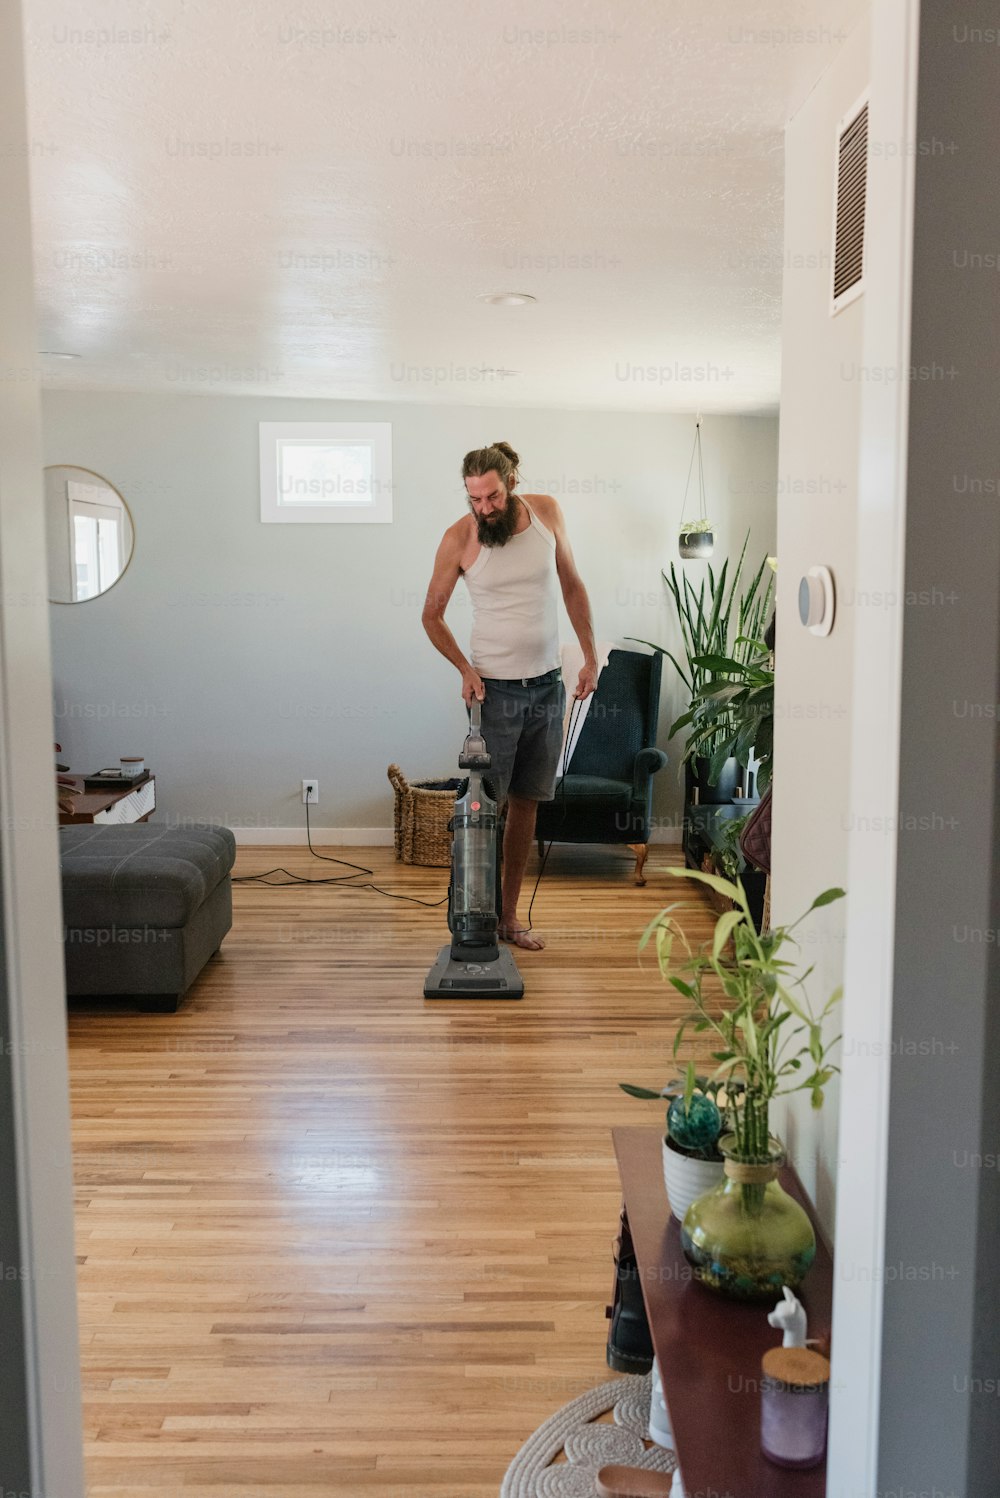 a man vacuuming a hard wood floor in a living room